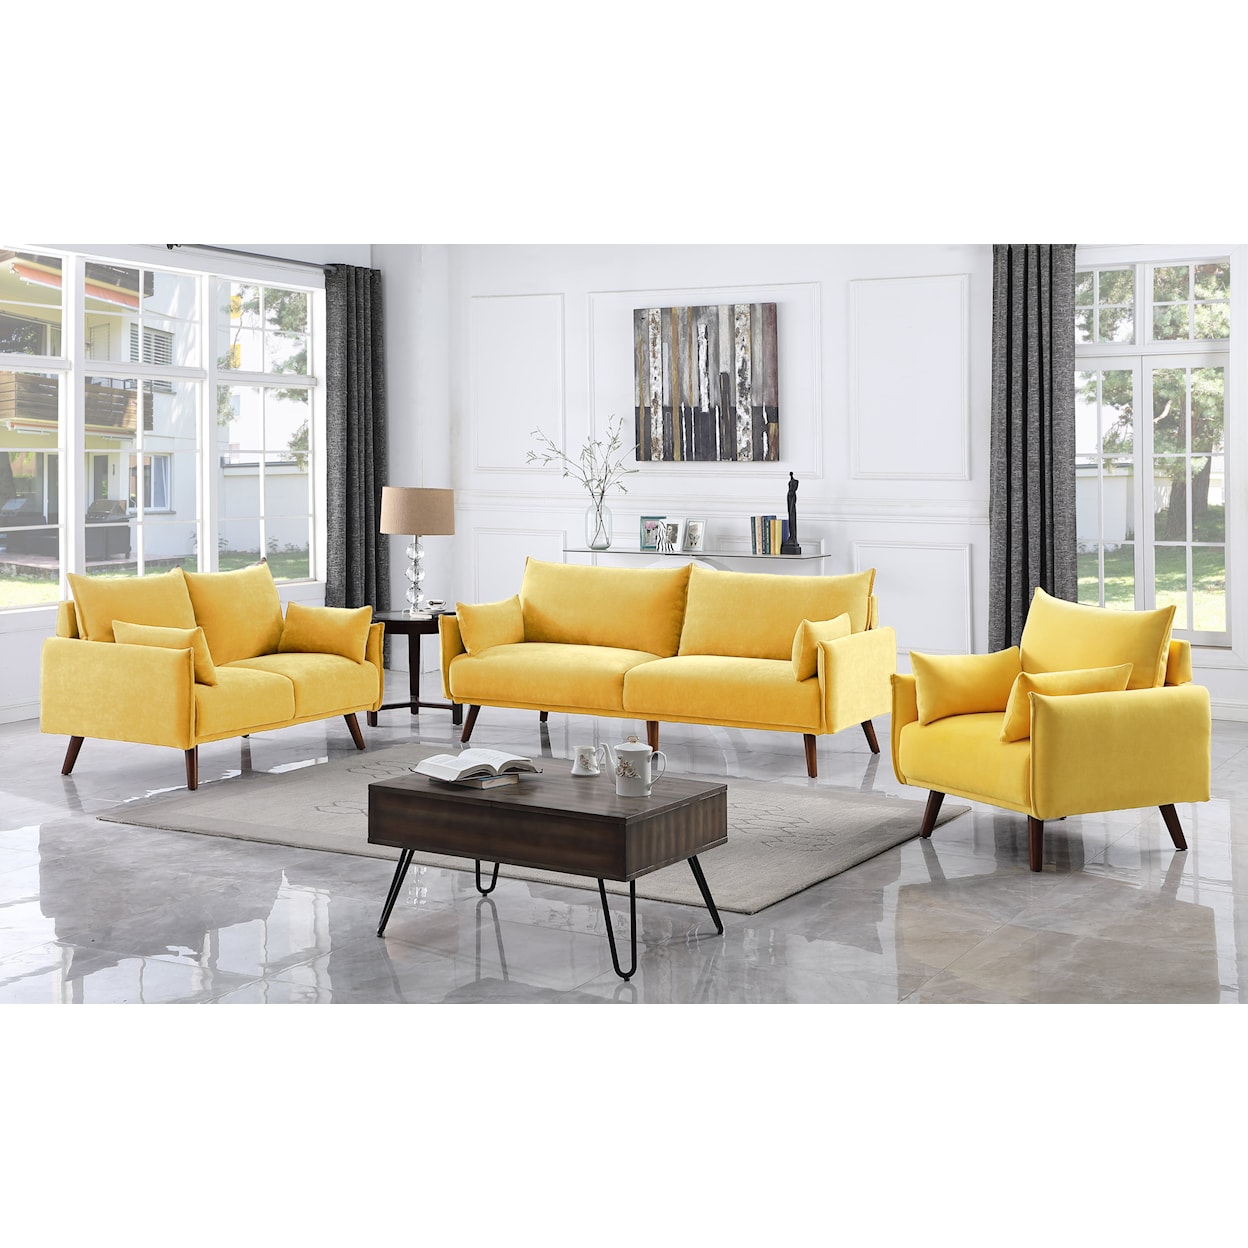 New Classic Furniture Reeves Living Room Set